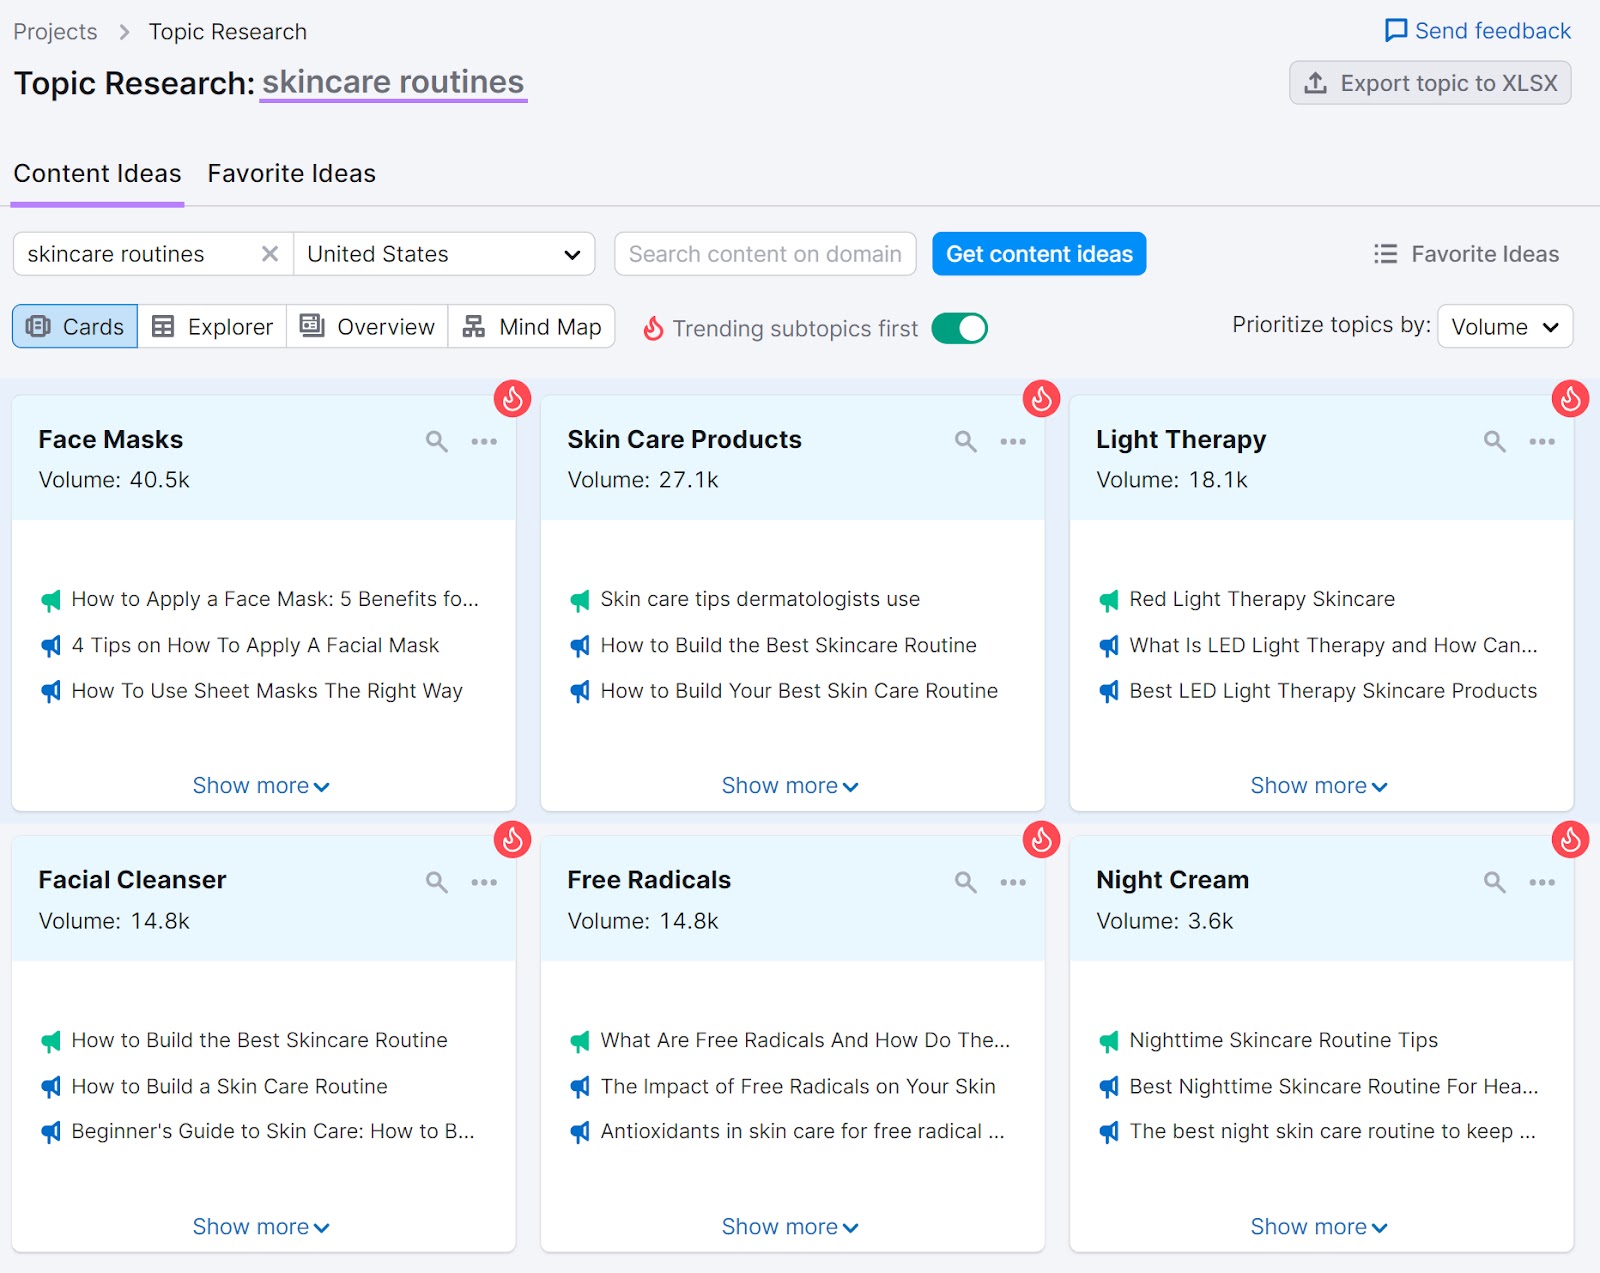 "Content Ideas" dashboard for "skincare routines" successful  Topic Research tool